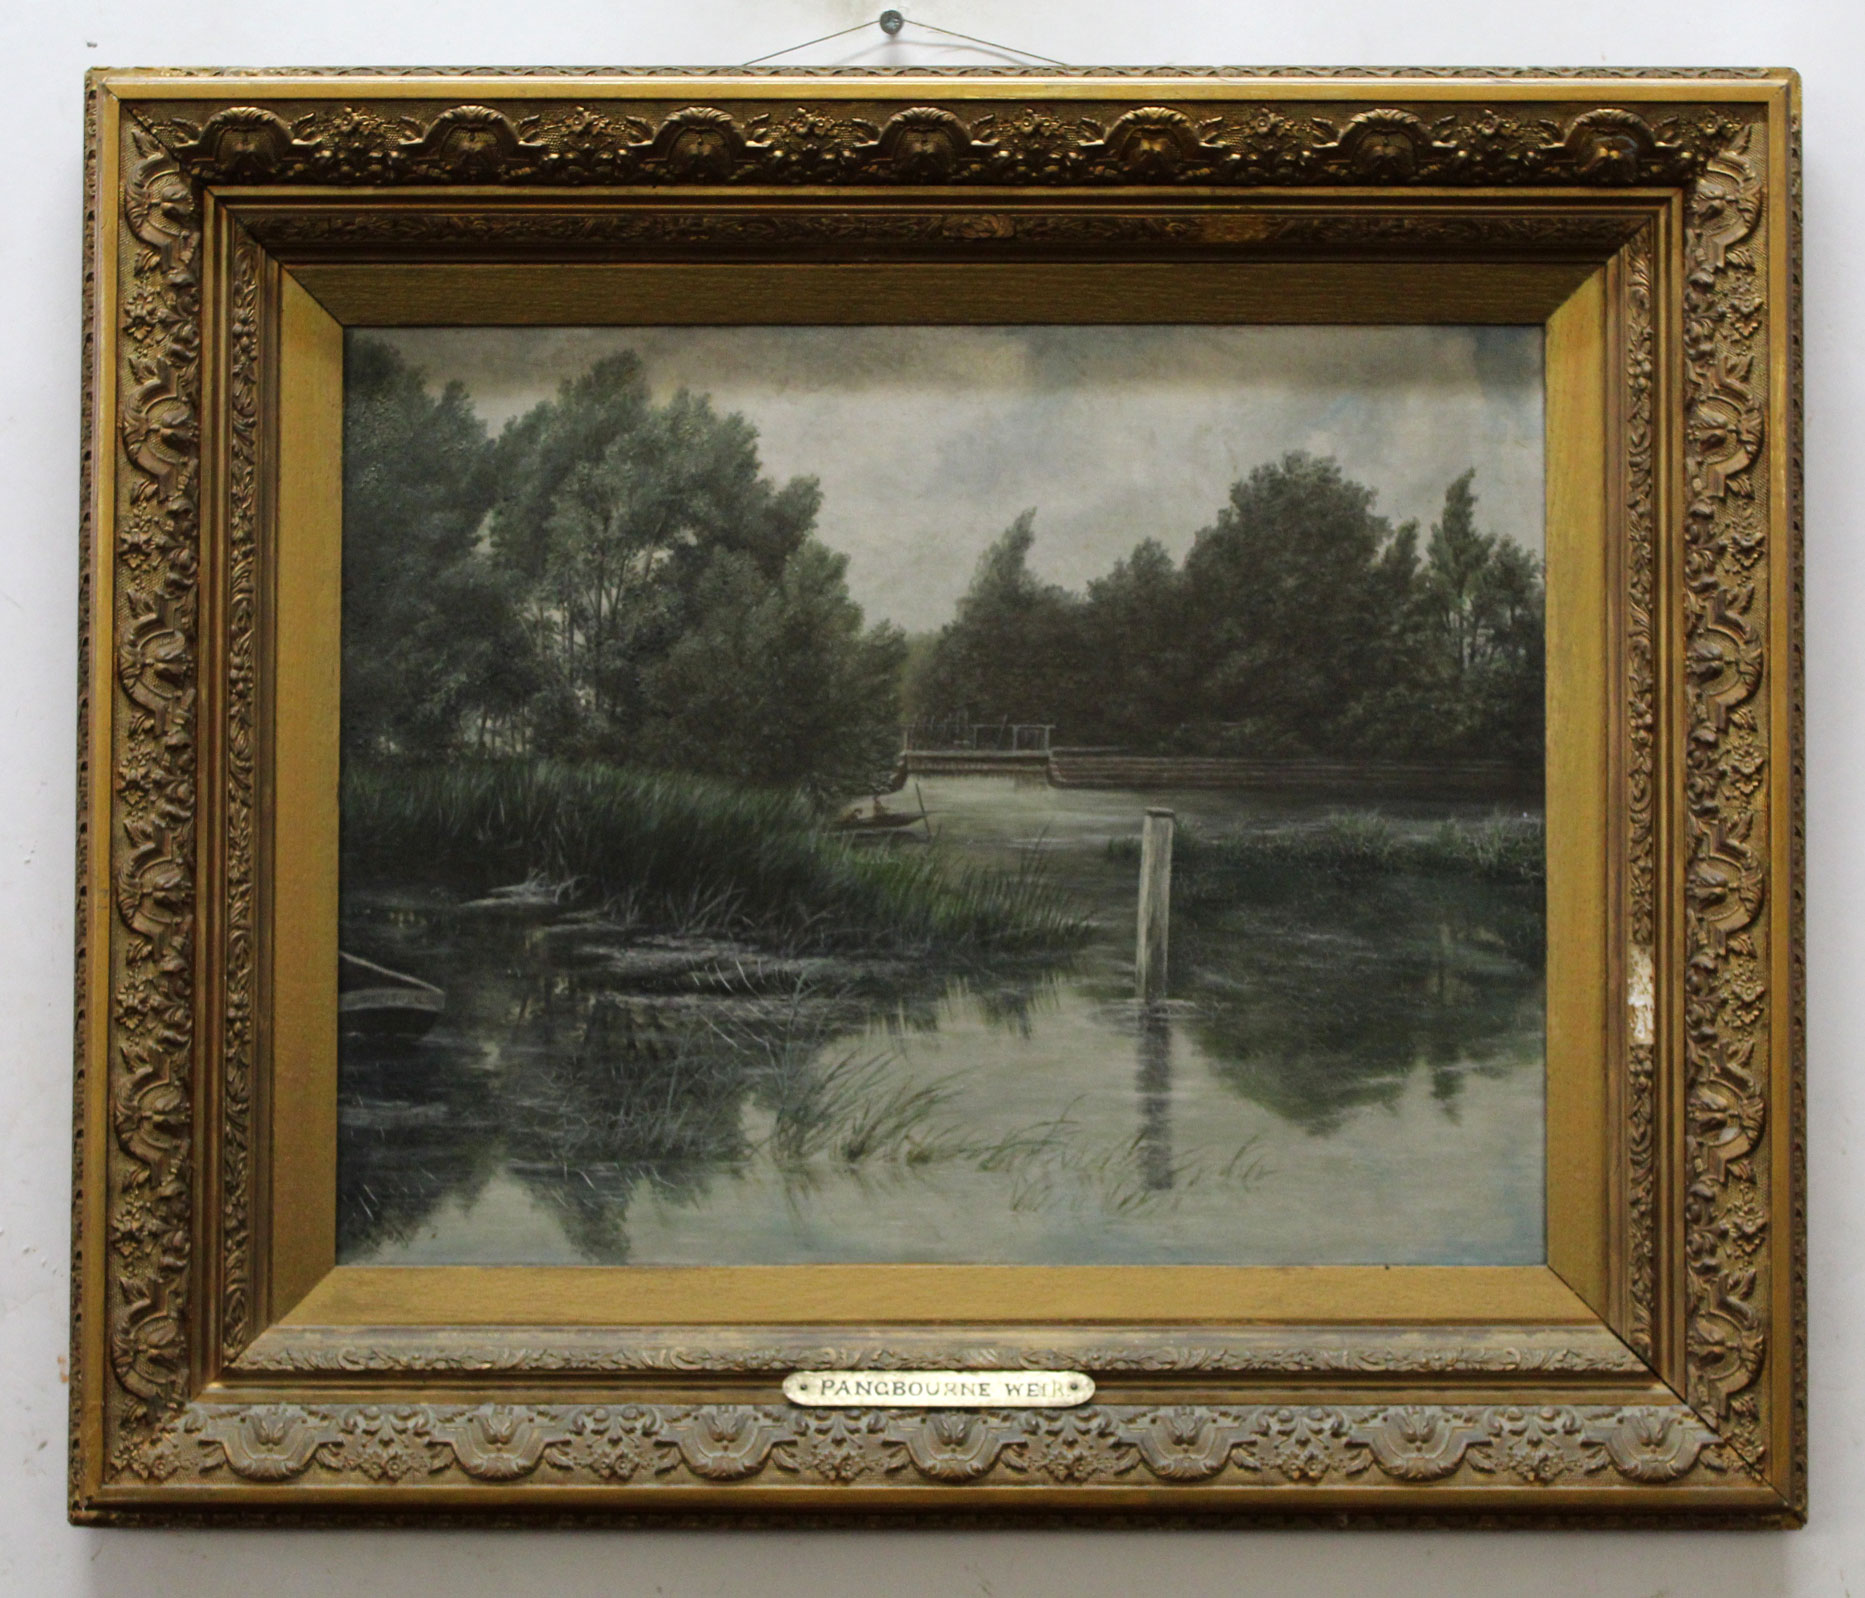 Foot, signed and dated 1901, oil on canvas, "Pangbourne Weir", 35 x 45cm